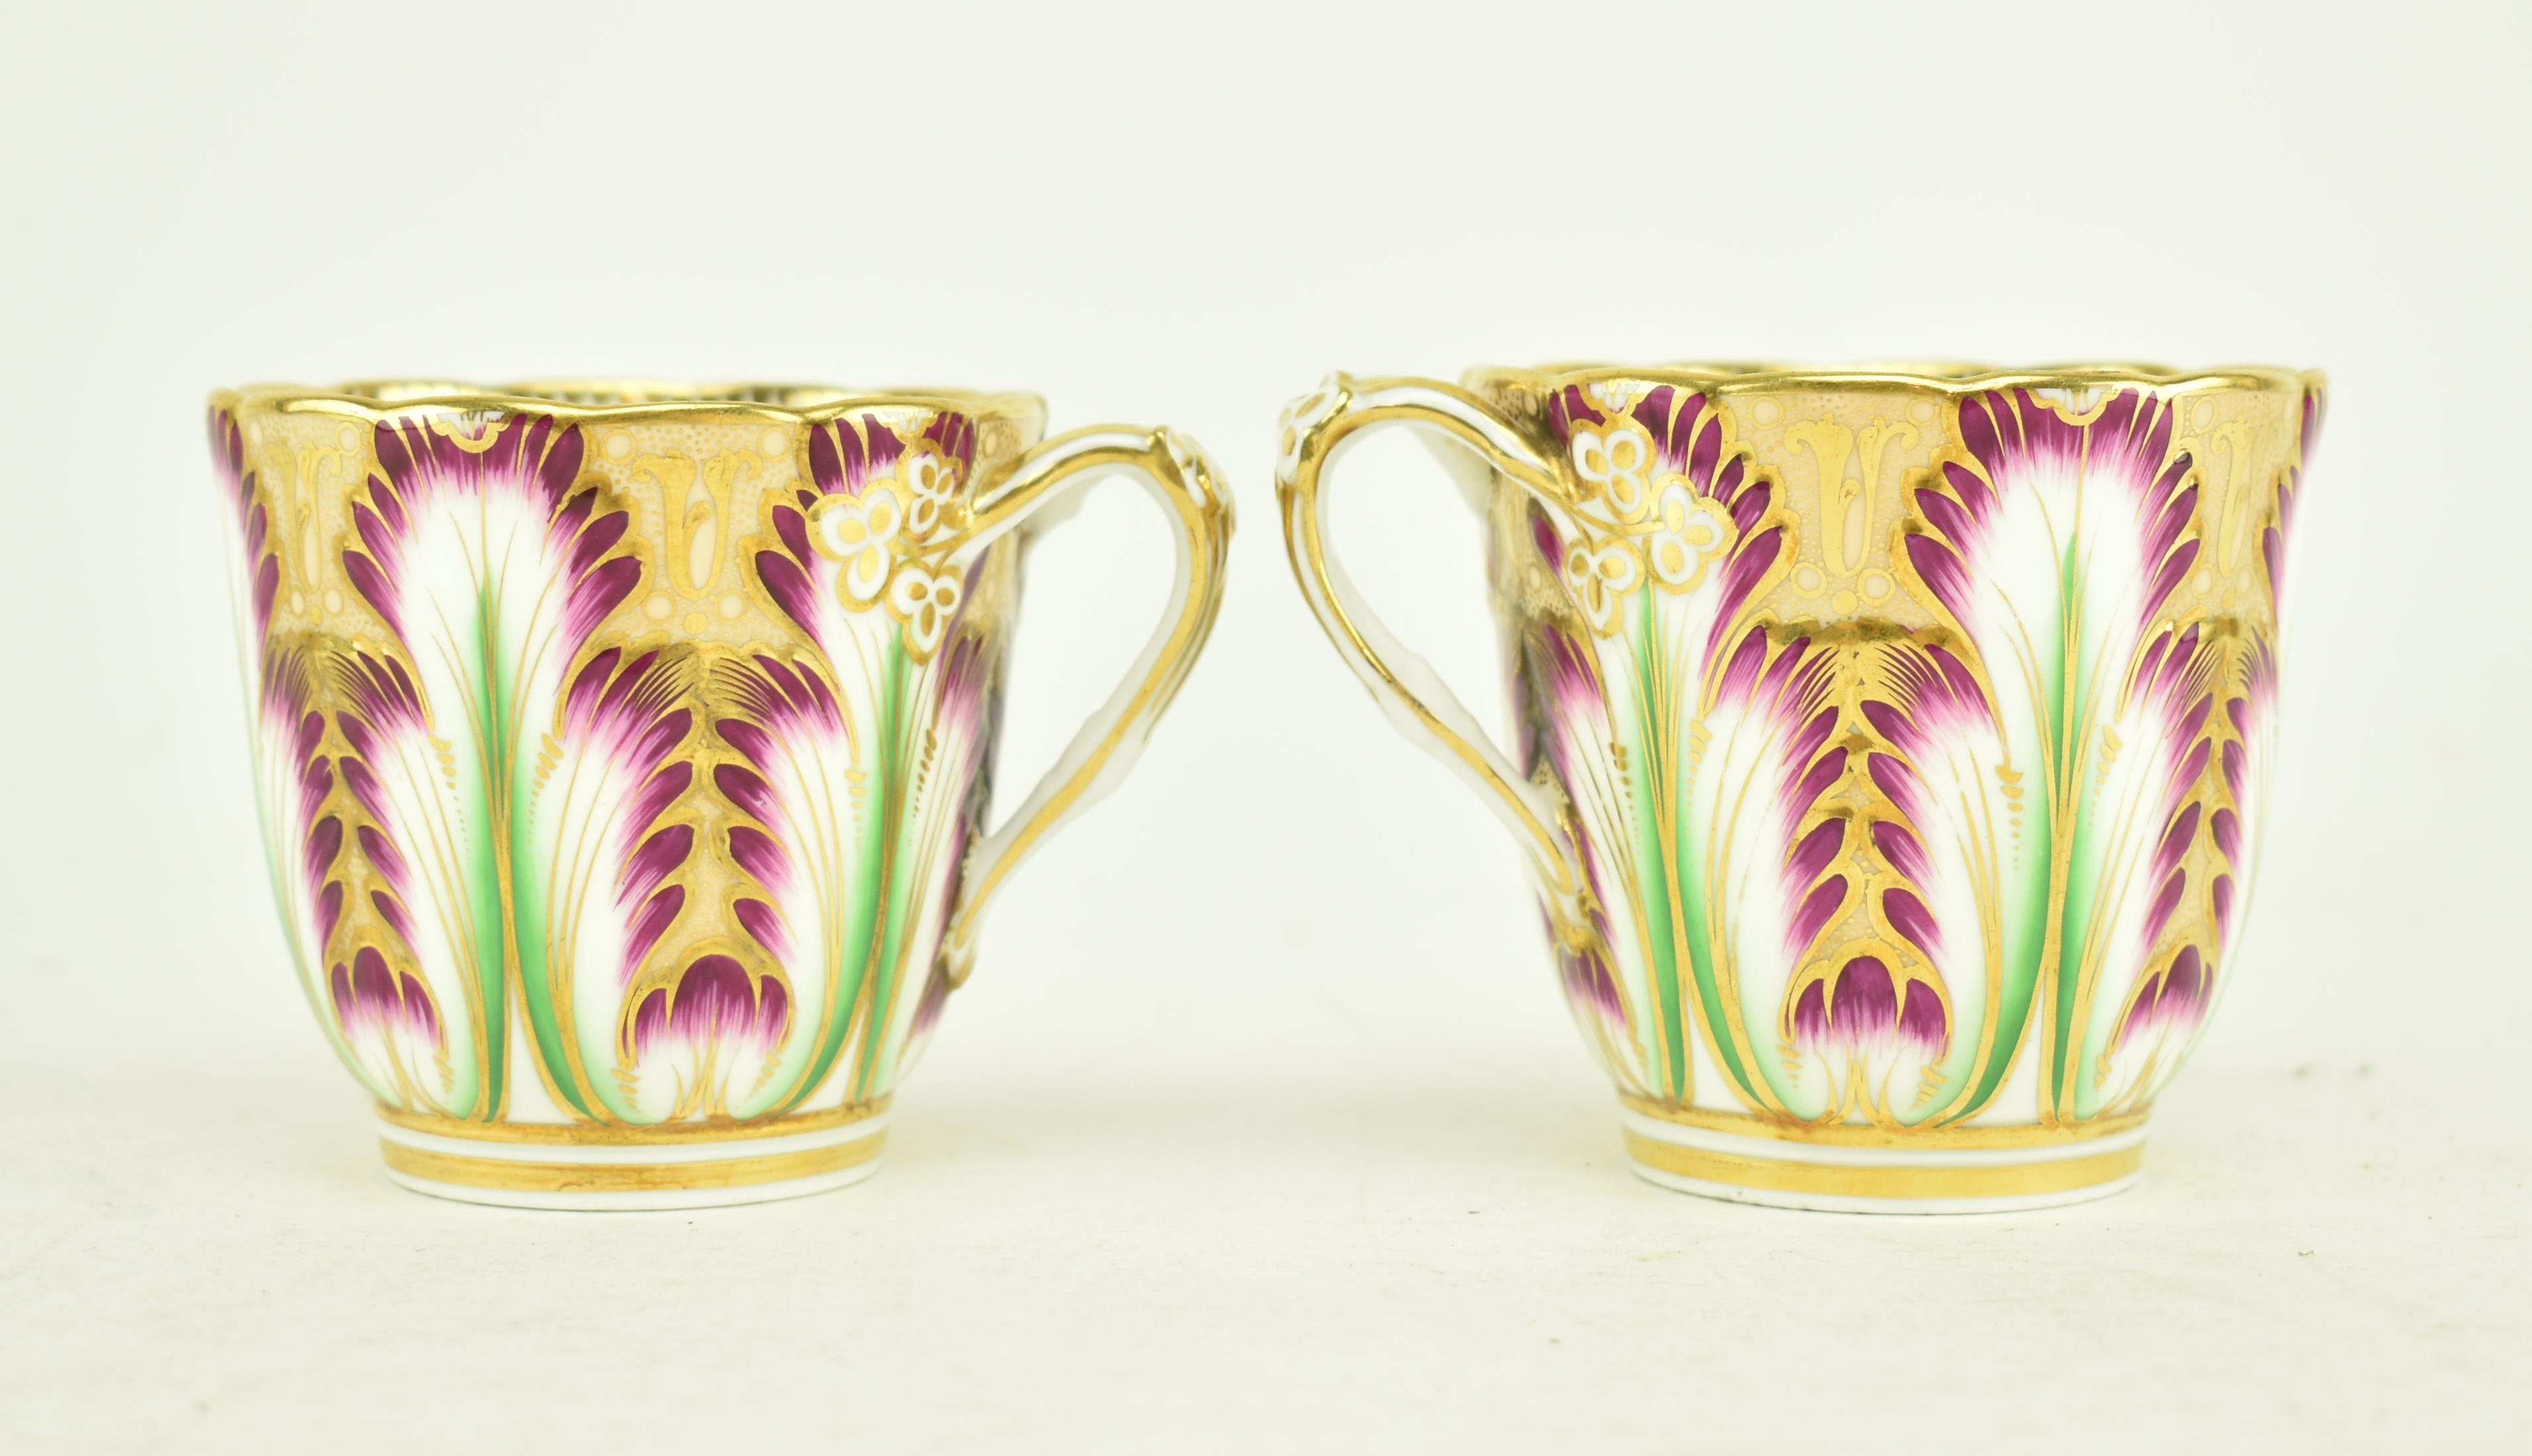 TWO MID 19TH CENTURY RIDGWAY PORCELAIN TEA CUPS WITH HANDLE - Image 2 of 4